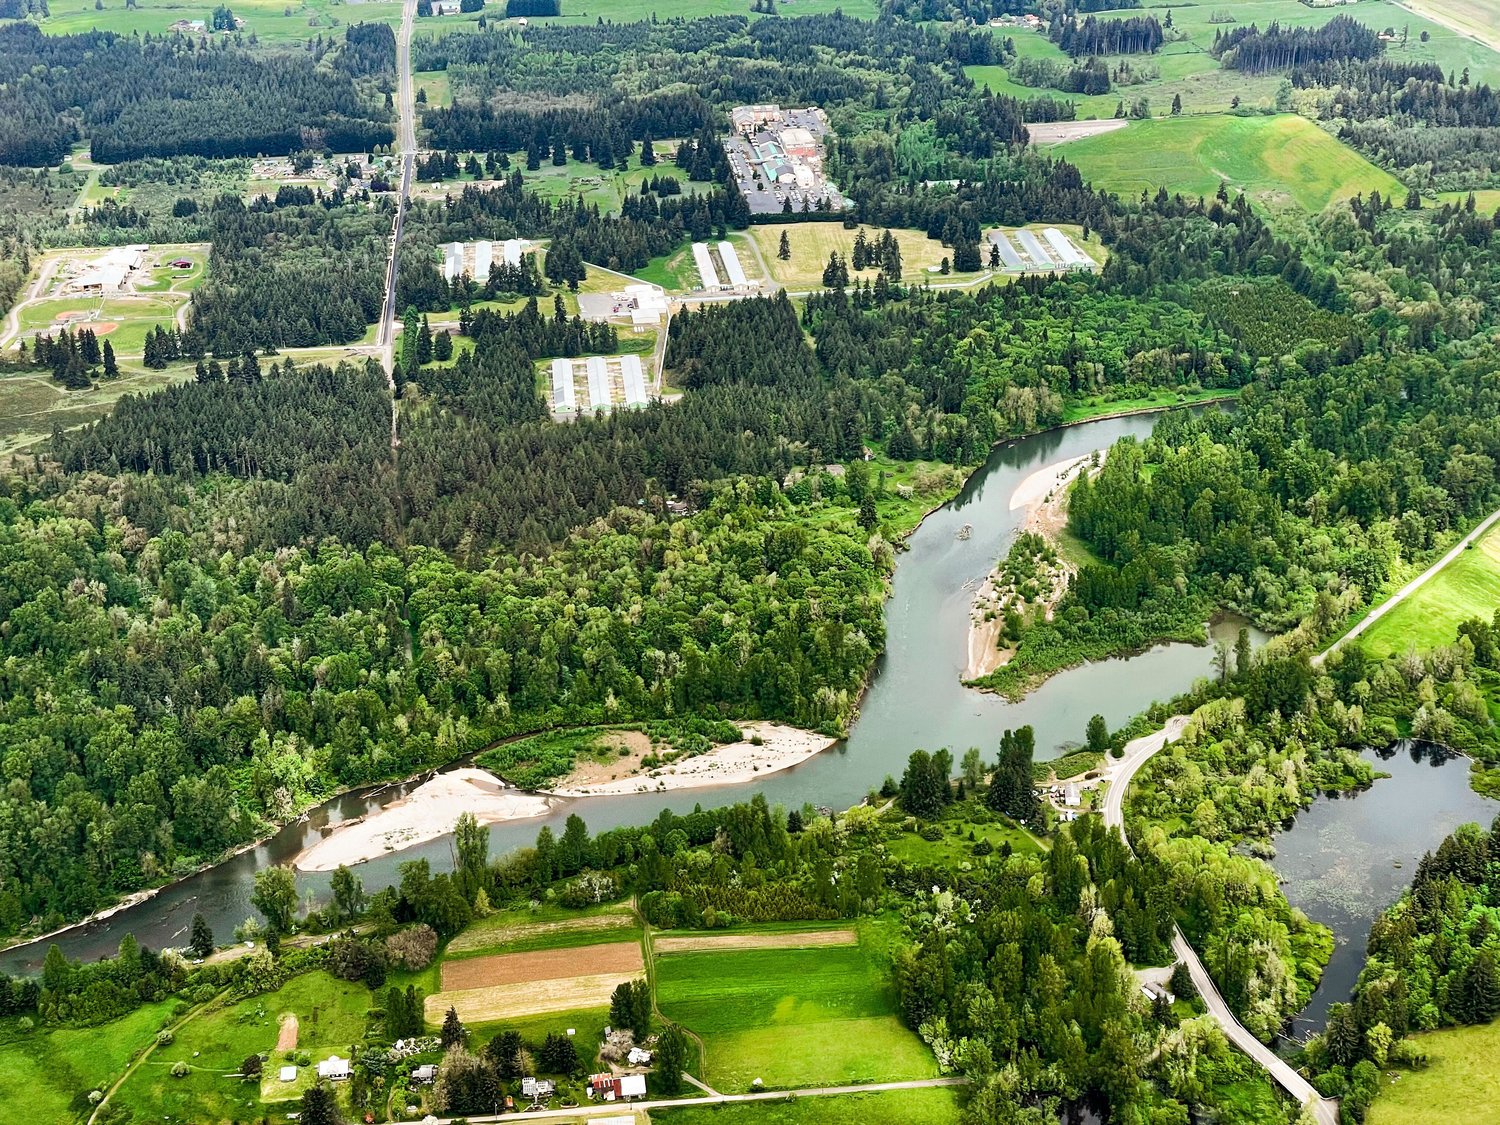 Lucky Eagle Casino is seen from above the Chehalis River in a Cessna Cardinal.